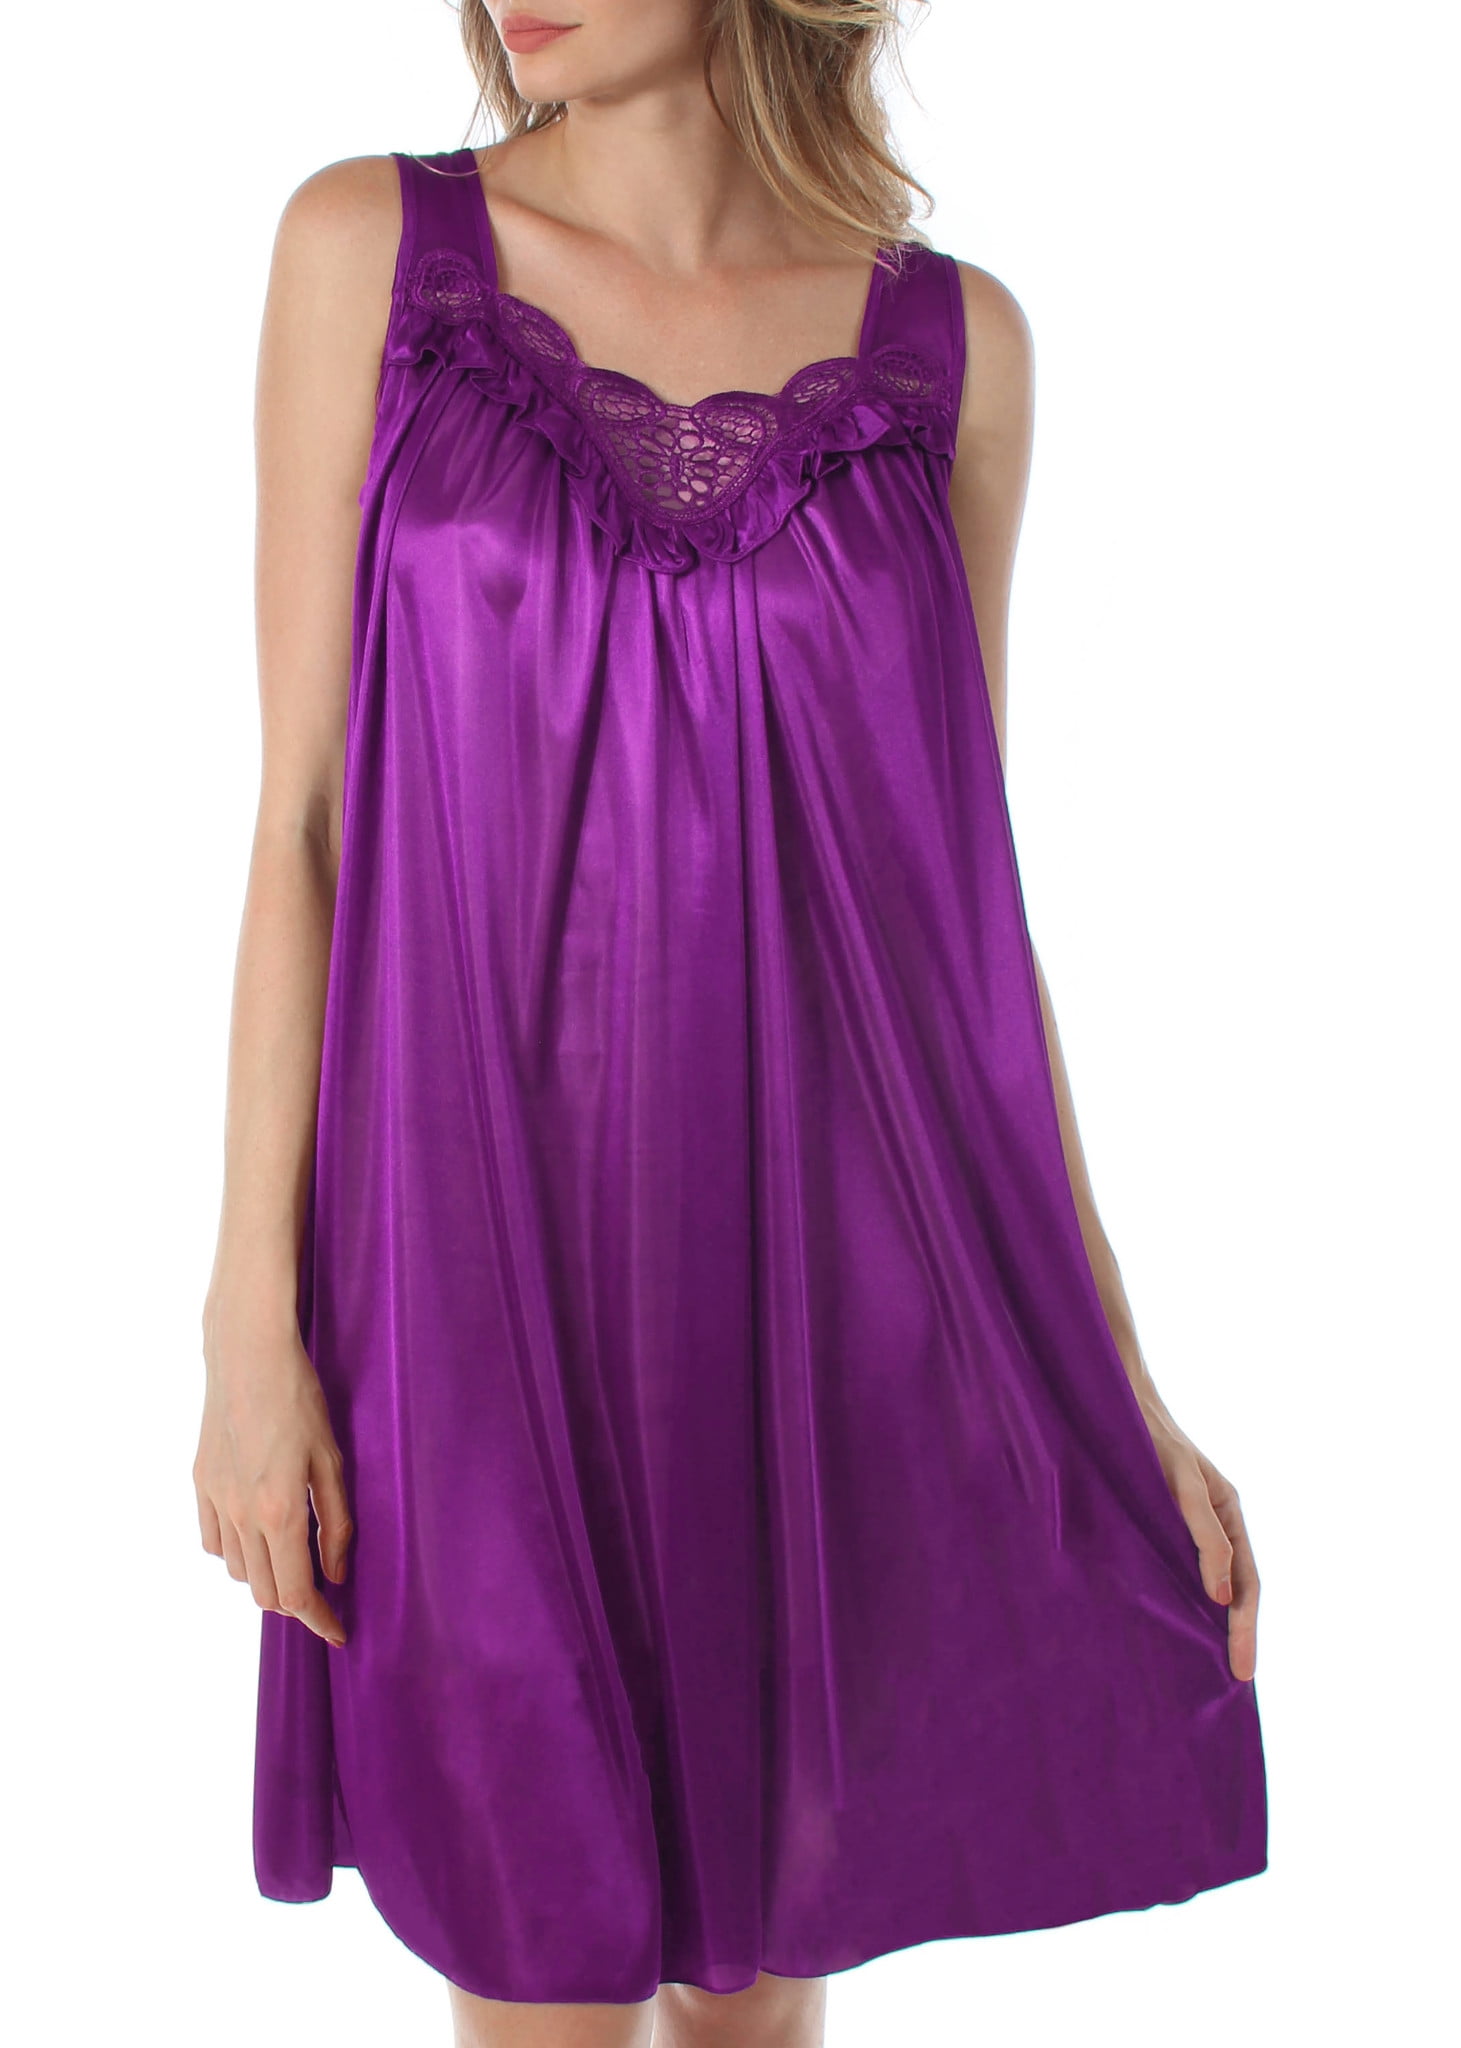 Venice Fashions - Venice Womens' Silky Looking Embroidered Nightgown 06 ...